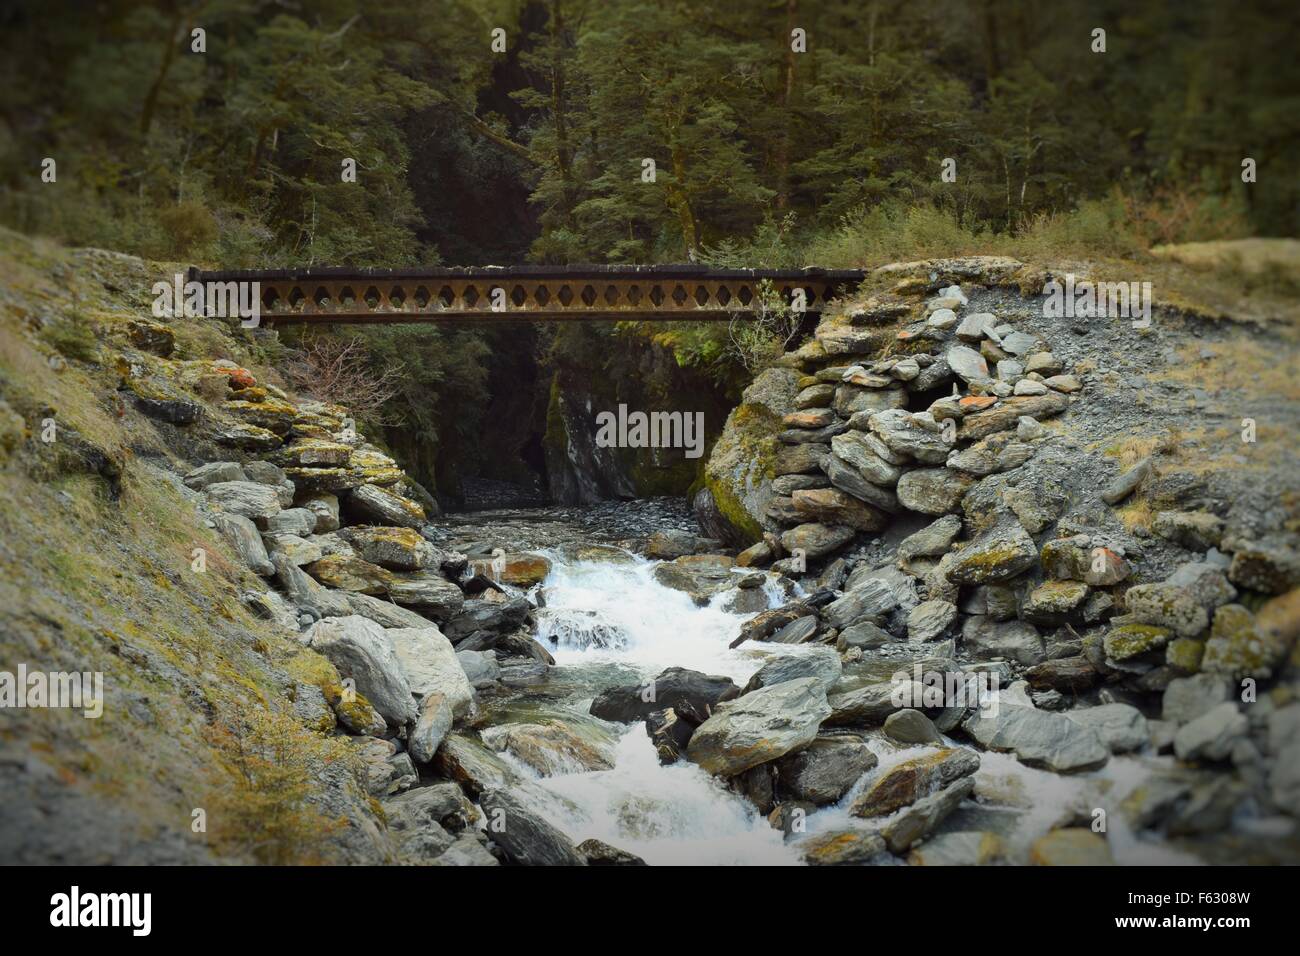 old bridge above a picturesque rocky stream that we came across when exploring New Zealands beautiful South Island Stock Photo